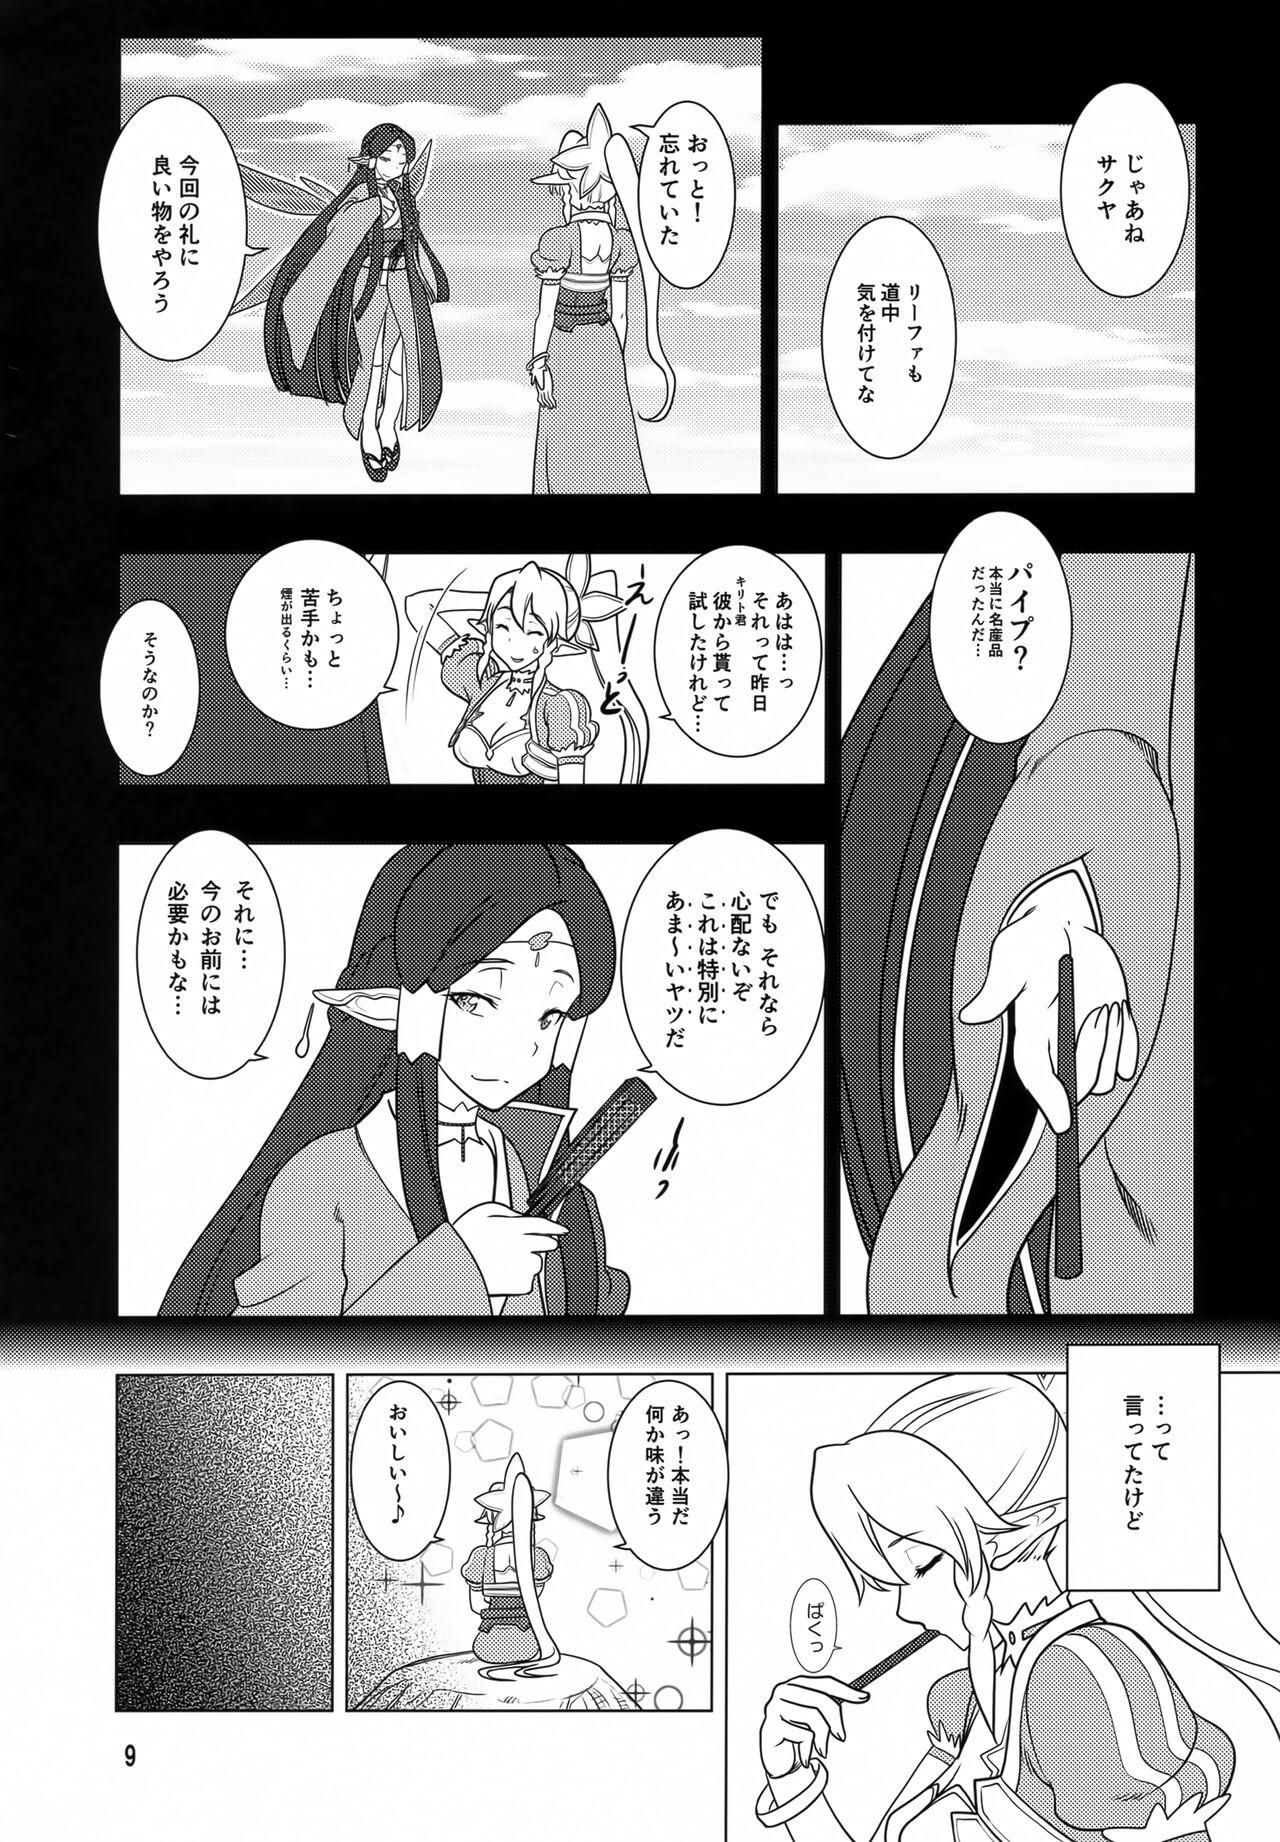 Usa Rifatto - Sword art online Lesbos - Page 8